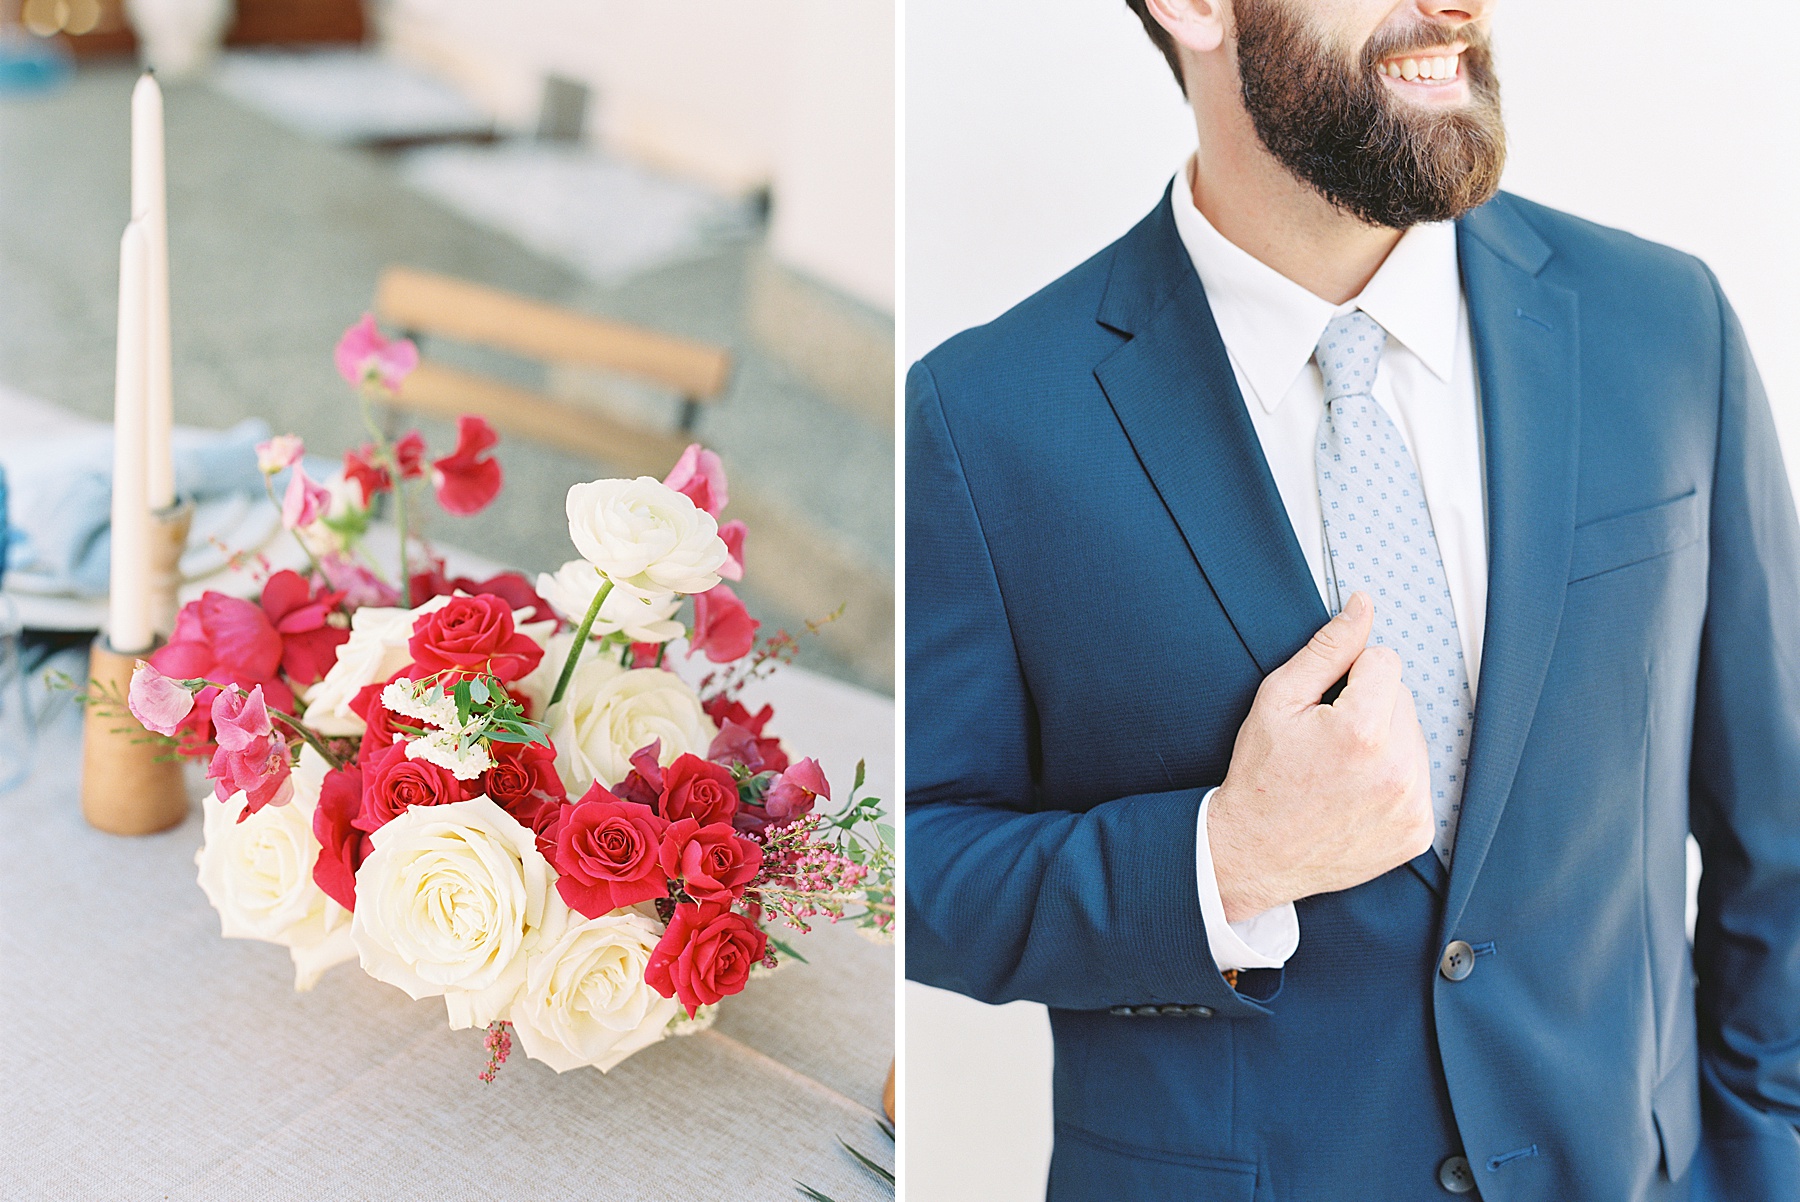 Grecian Inspired Micro-Wedding with Events by Kristina Elyse - Ash Baumgartner - Inspired by This - Sonoma Wedding Photographer_0017.jpg